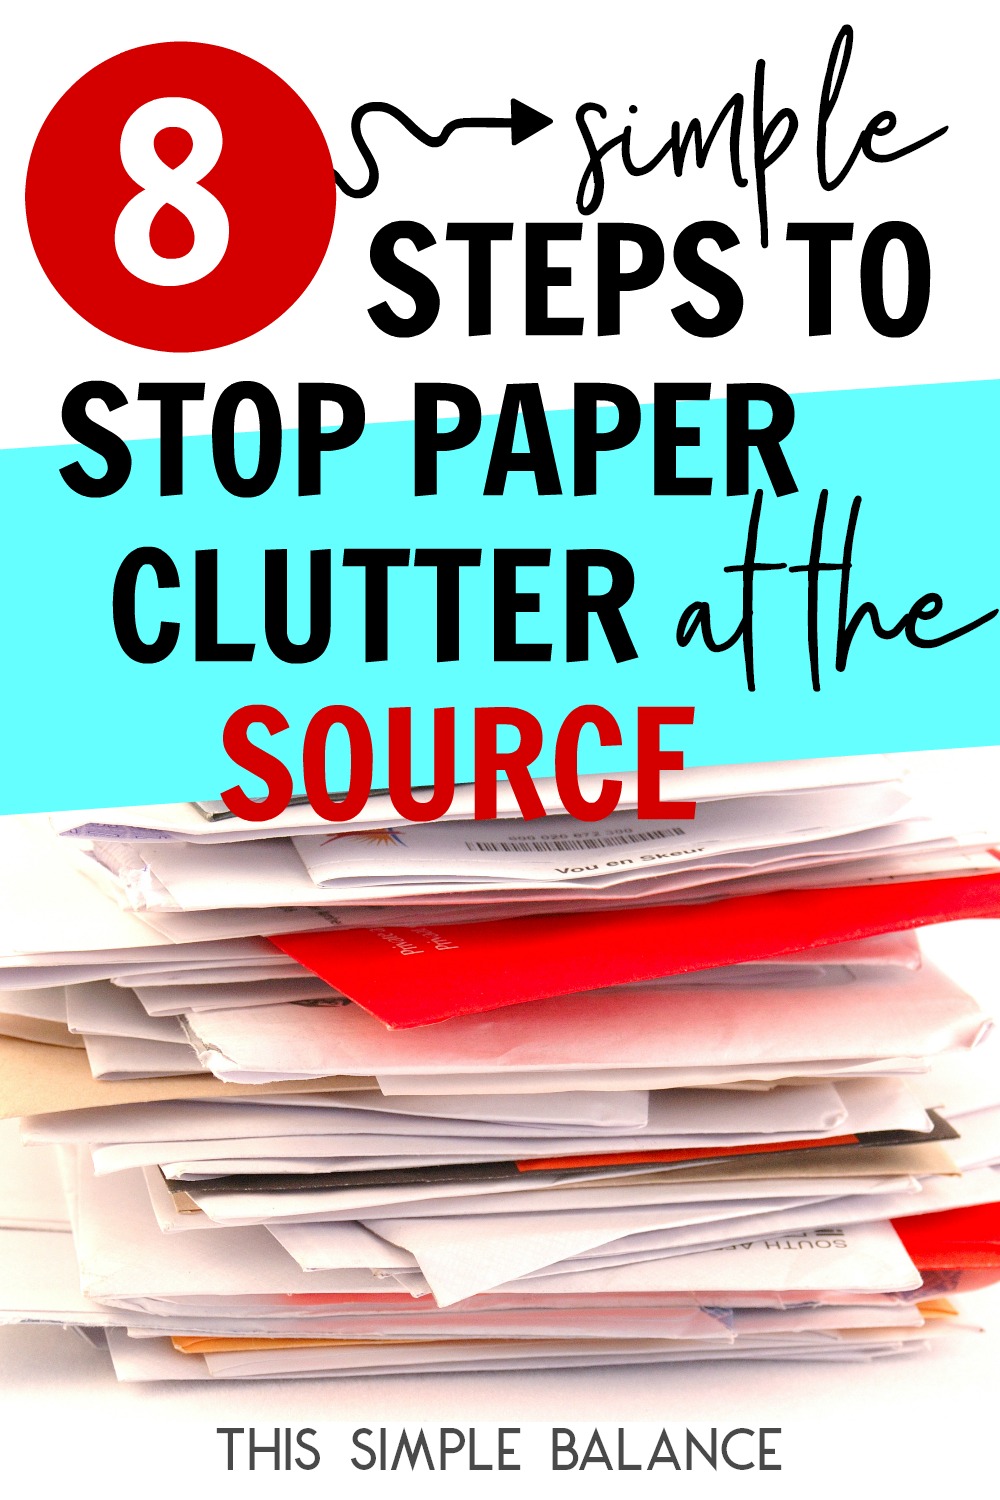 messy stack of papers with text overlay, "8 simple steps to stop paper clutter at the source"